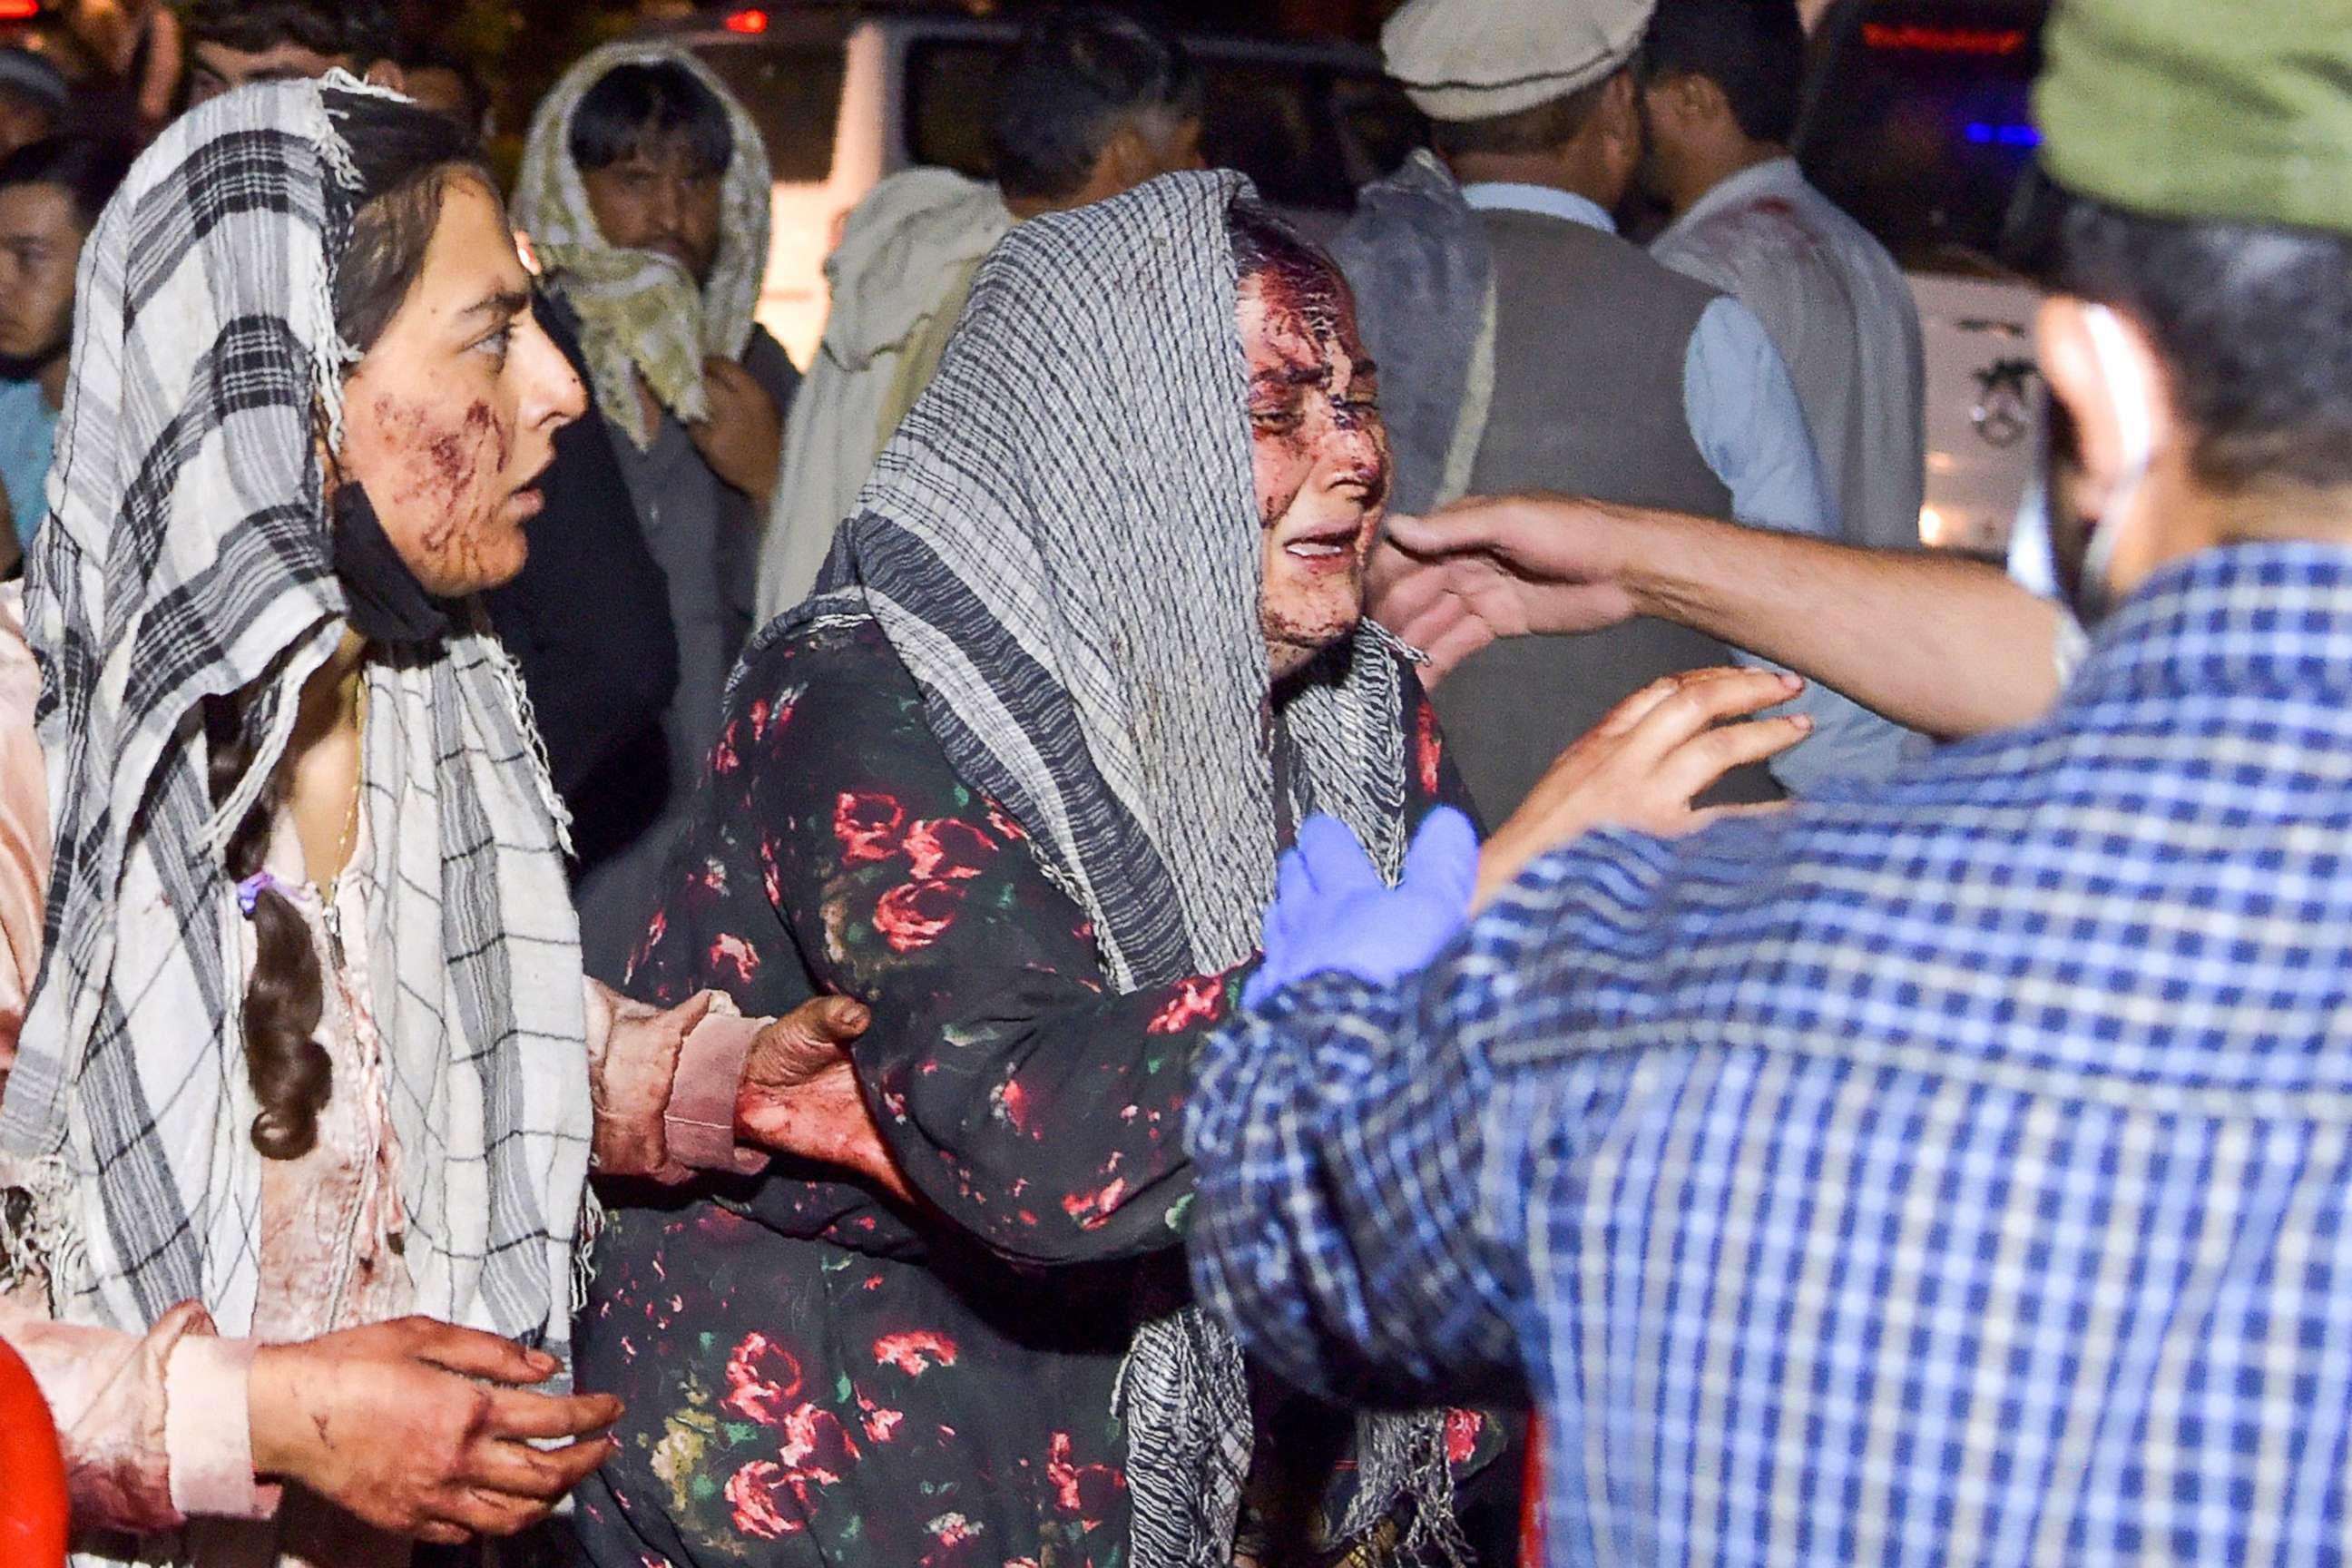 PHOTO: Wounded women arrive at a hospital for treatment after a bomb attack which left several dead and wounded outside the airport in Kabul, Afghanistan, Aug. 26, 2021.